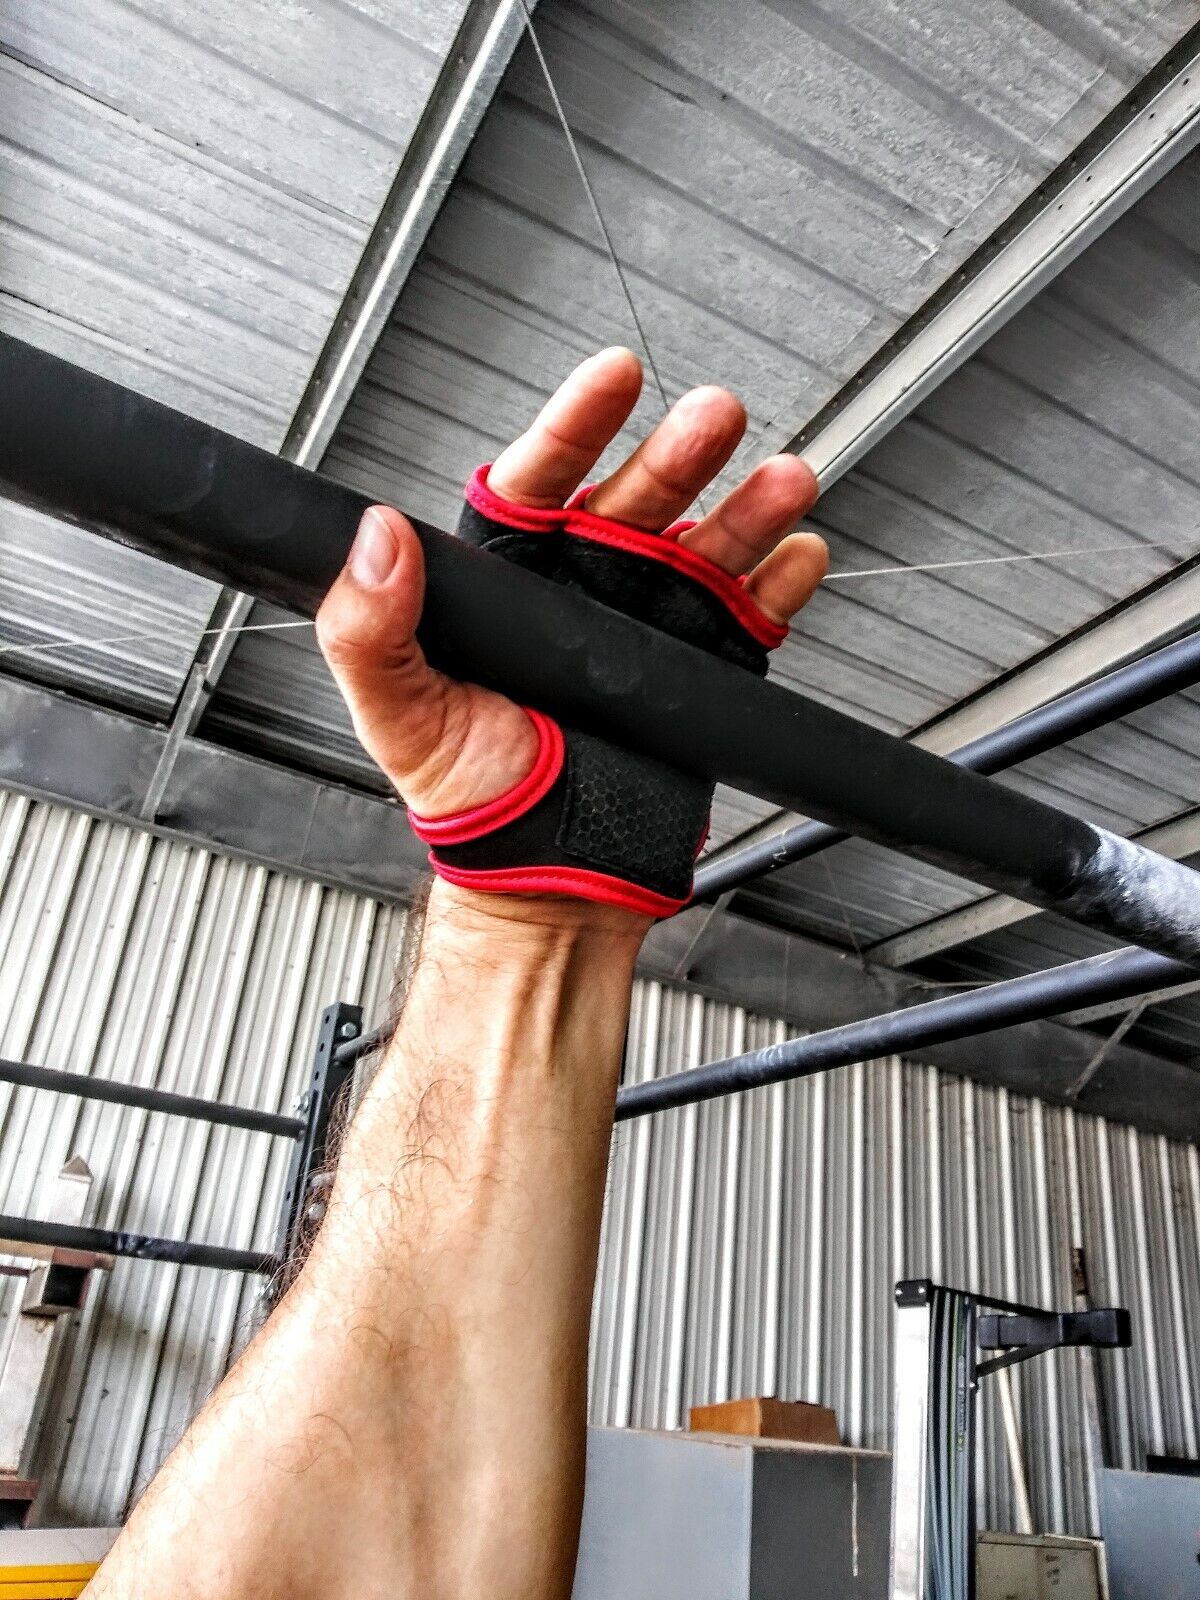 Crossfit Gym Gloves for Weightlifting and Training